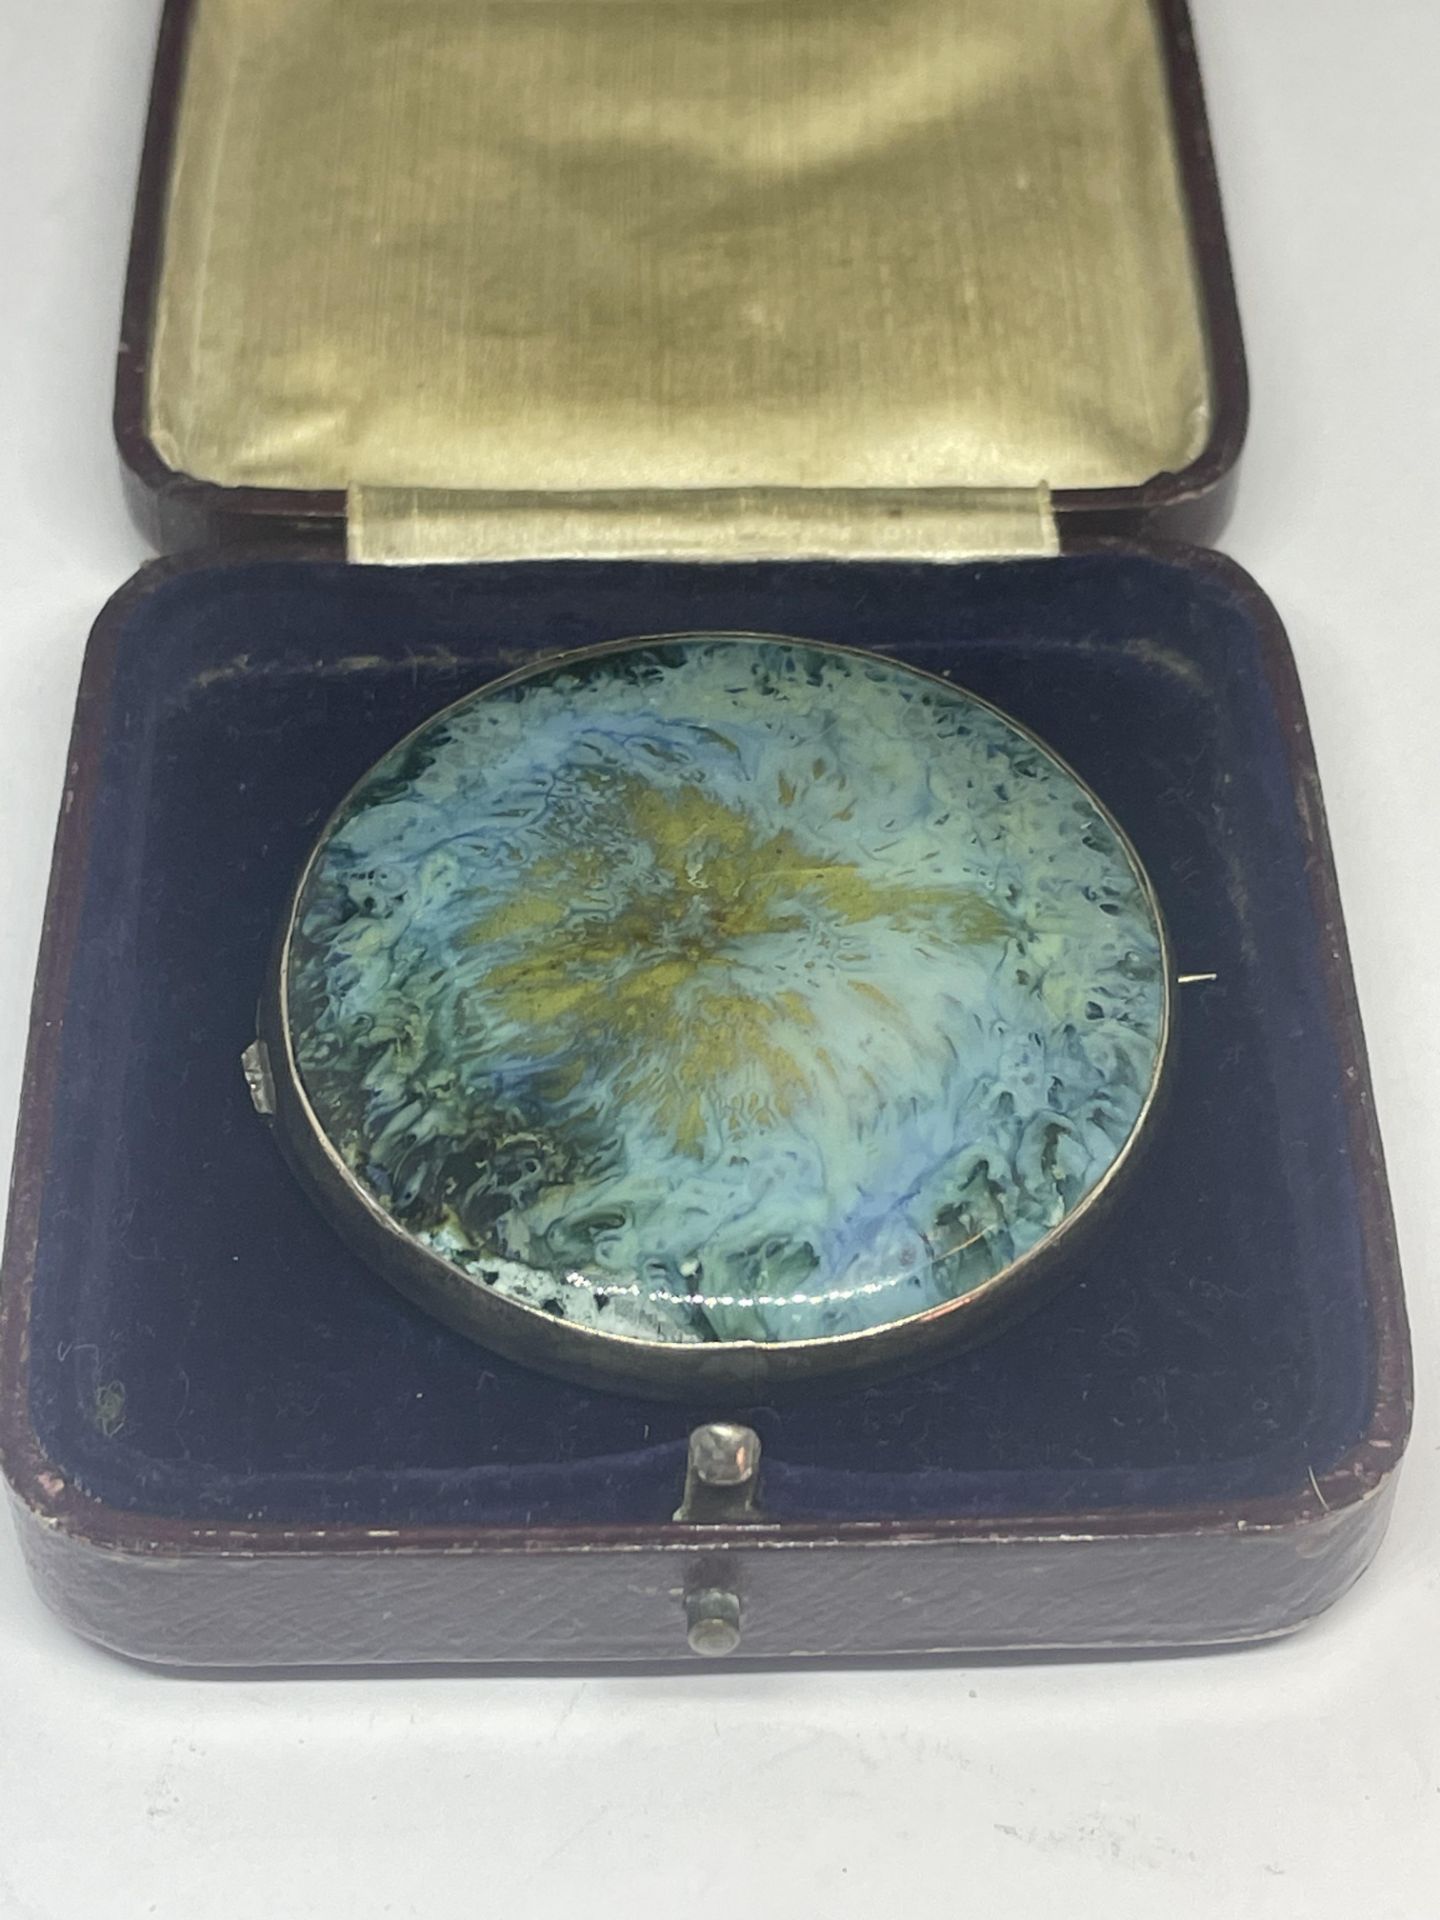 A RUSKIN BROOCH IN A SILVER MOUNT 5CM DIAMETER IN A PRESENTATION BOX - Image 3 of 3